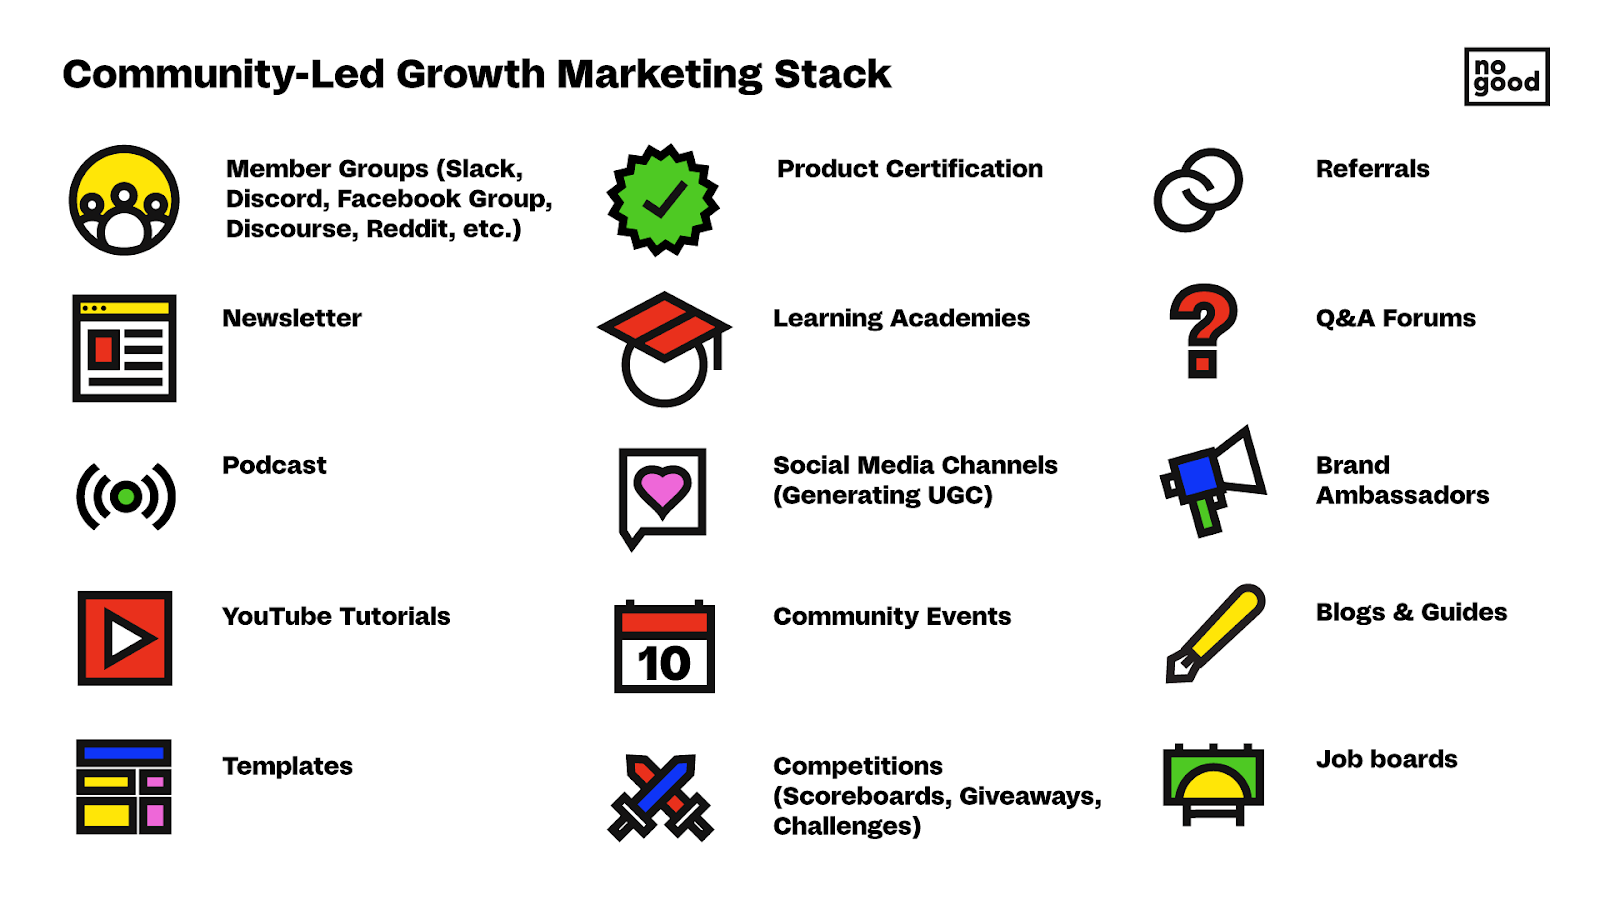 Community-led growth marketing stack including member groups, newsletters, social media channels, forums, blogs, and more.